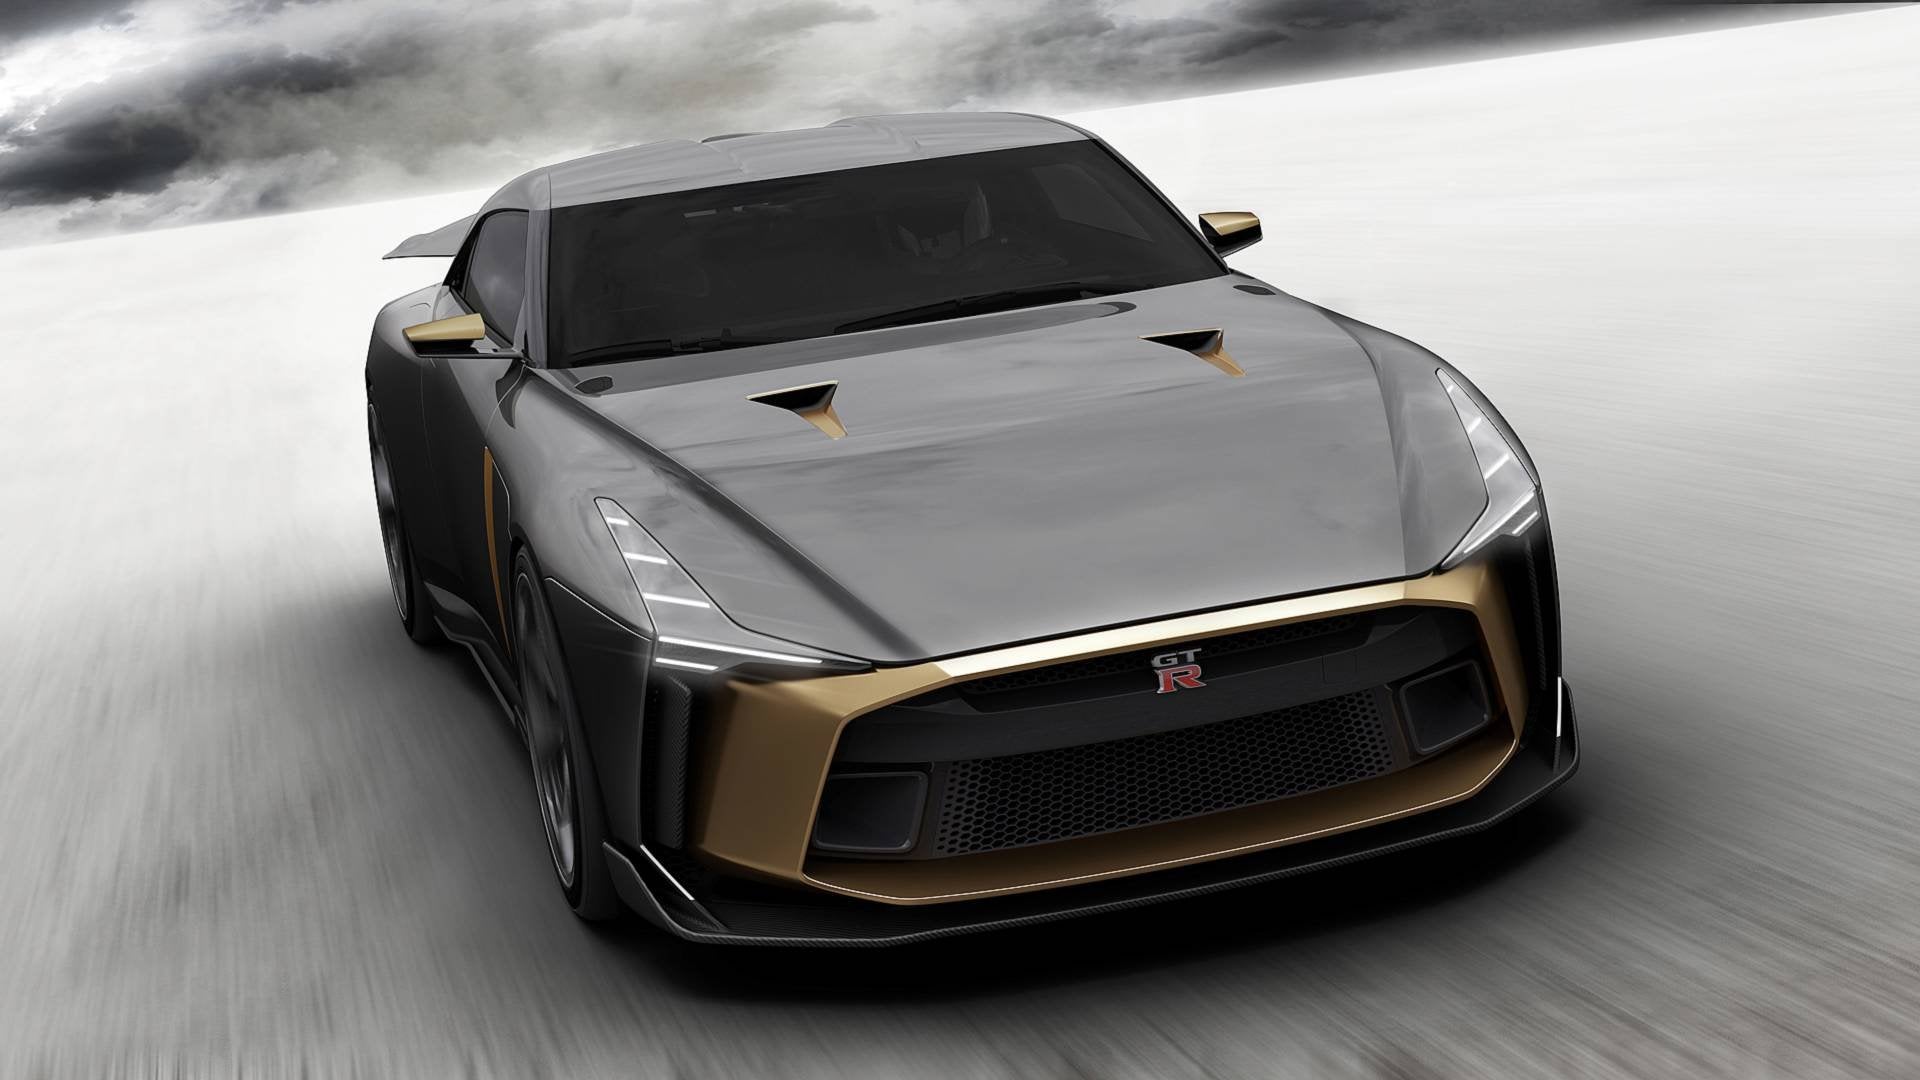 A Nismo Hybrid Sports Car is Coming This Decade